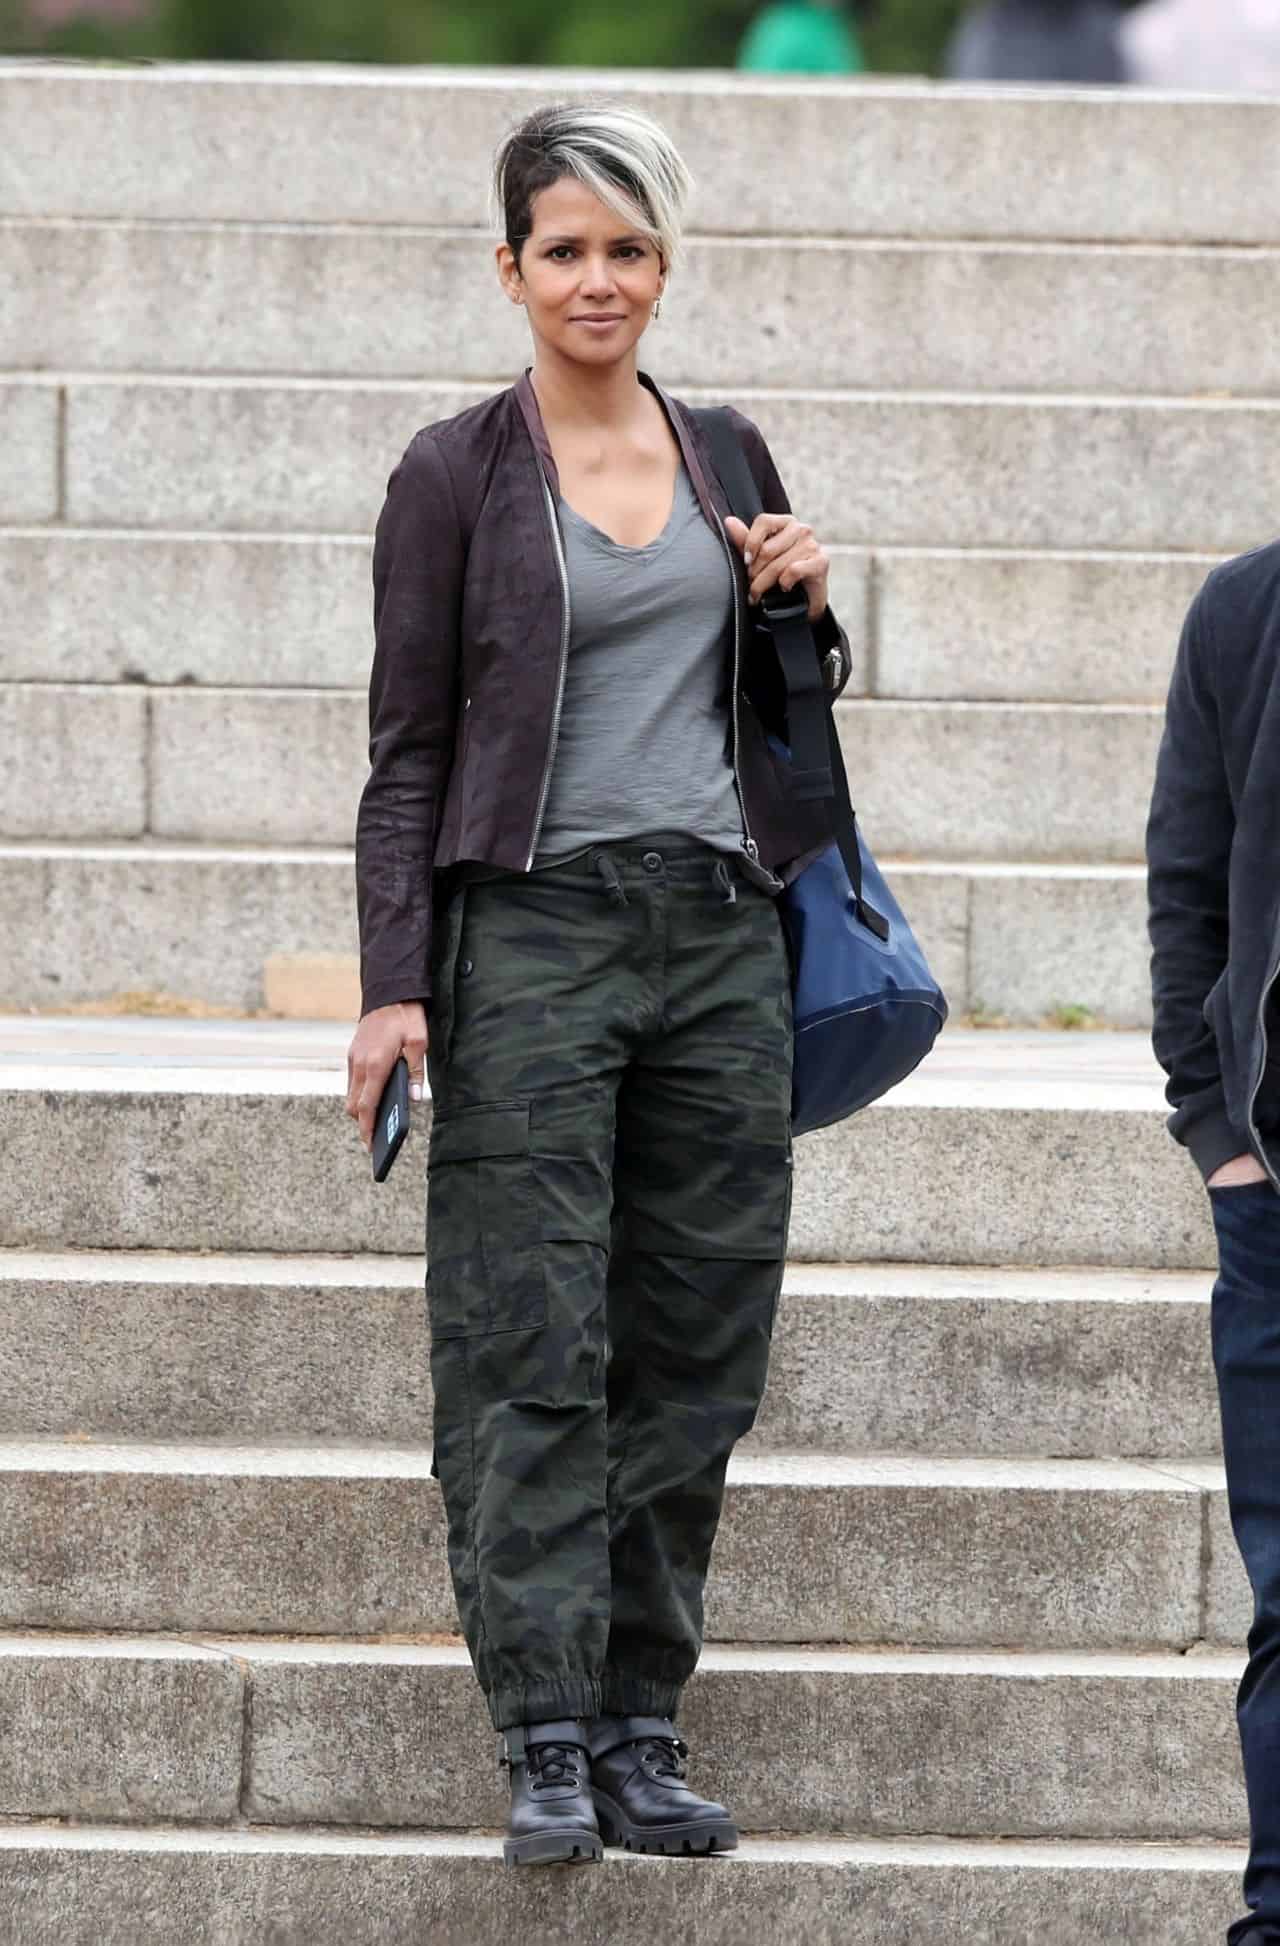 Halle Berry Looks Great on the Set of Her New Movie "Our Man from Jersey"